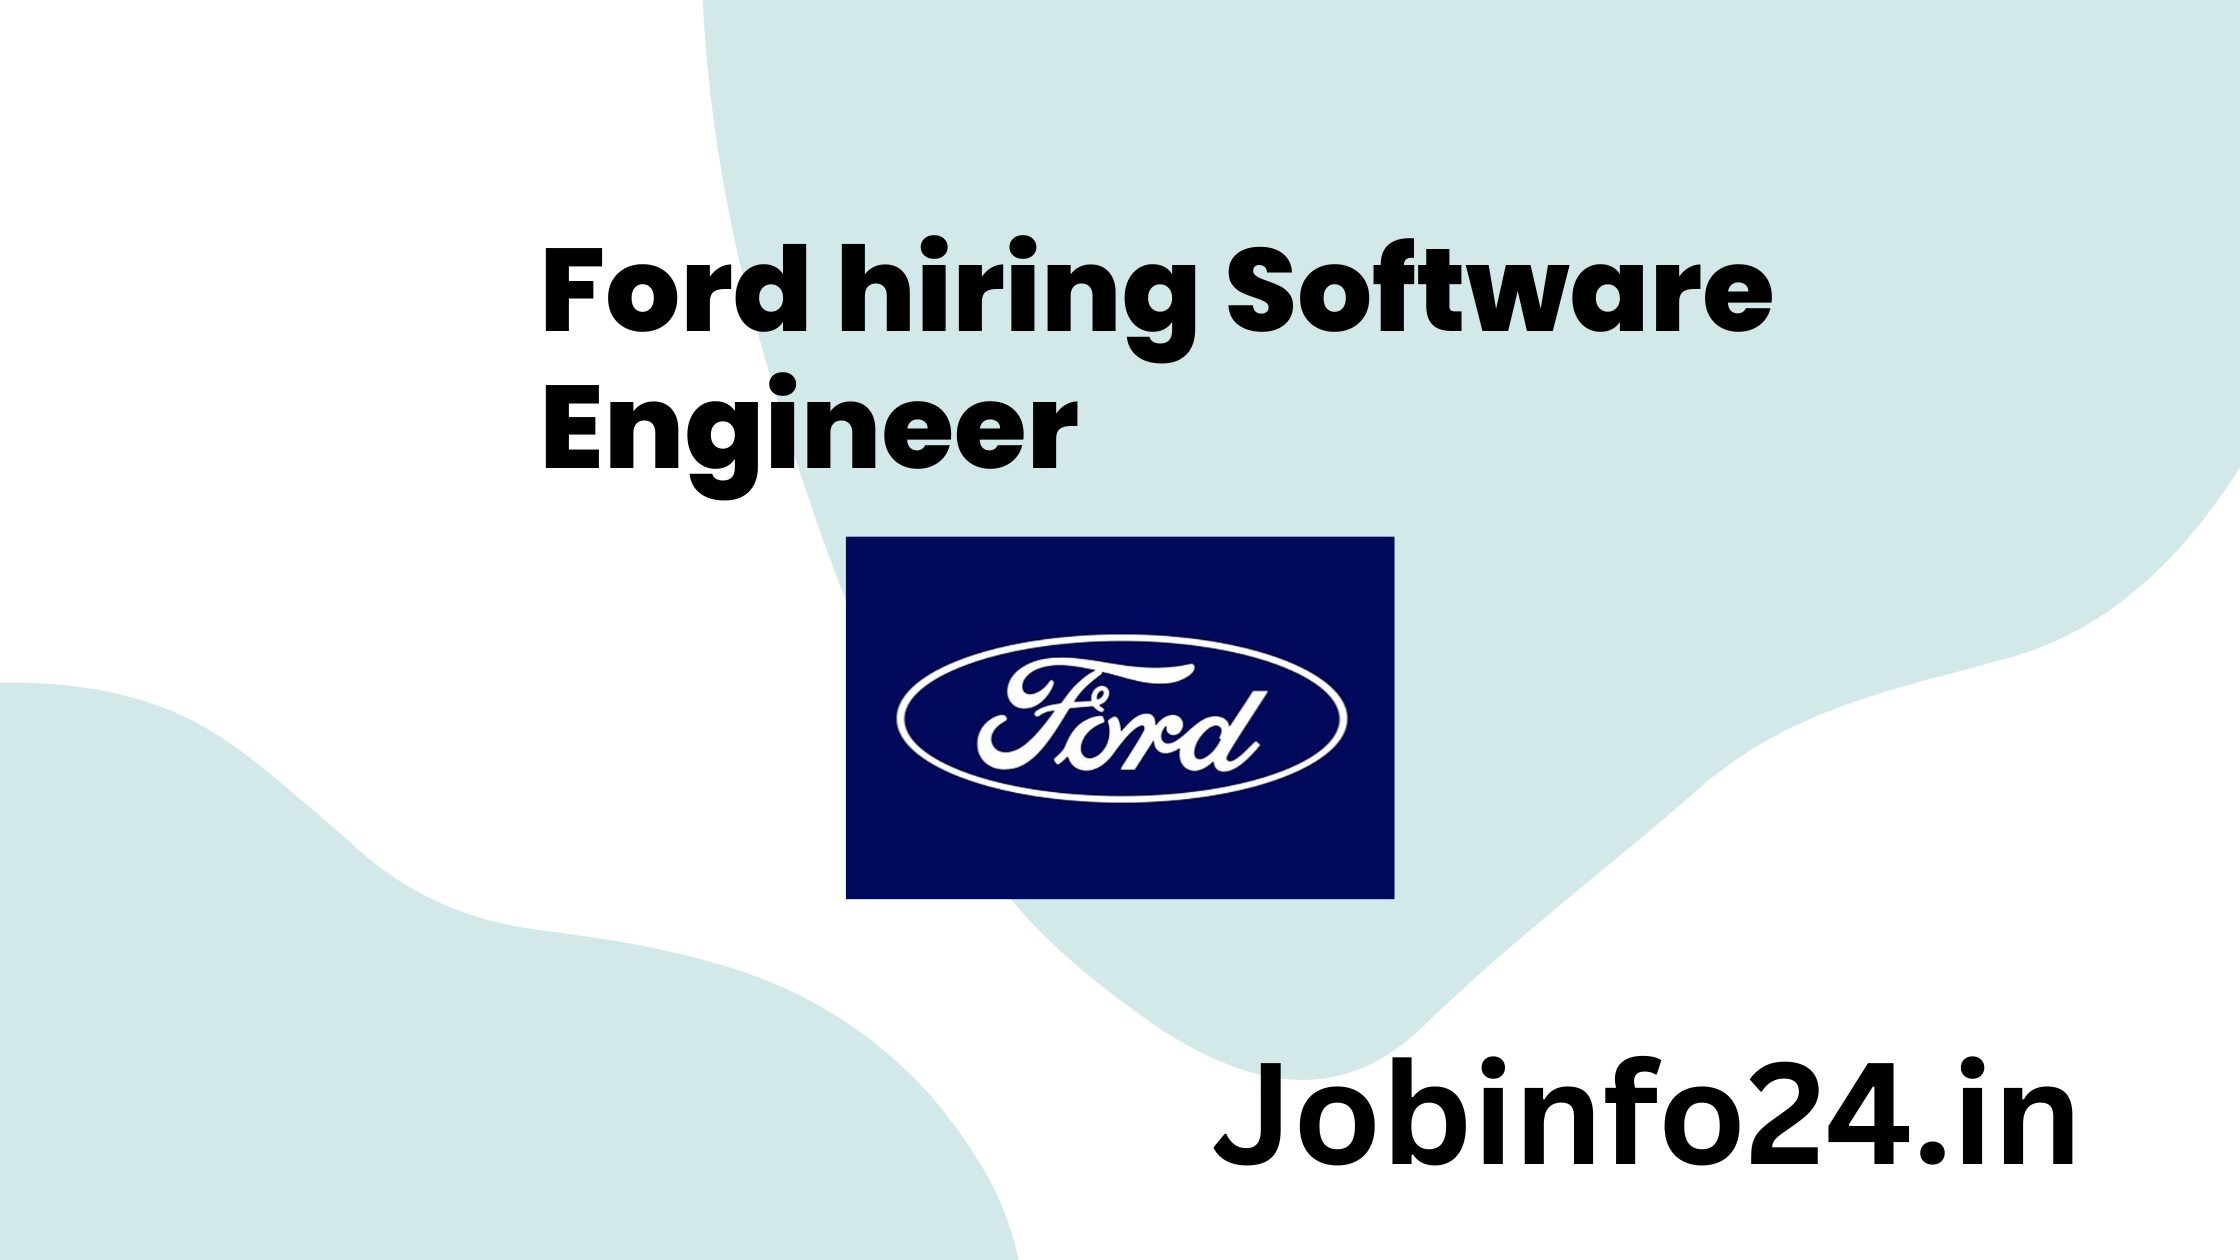 Ford hiring Software Engineer